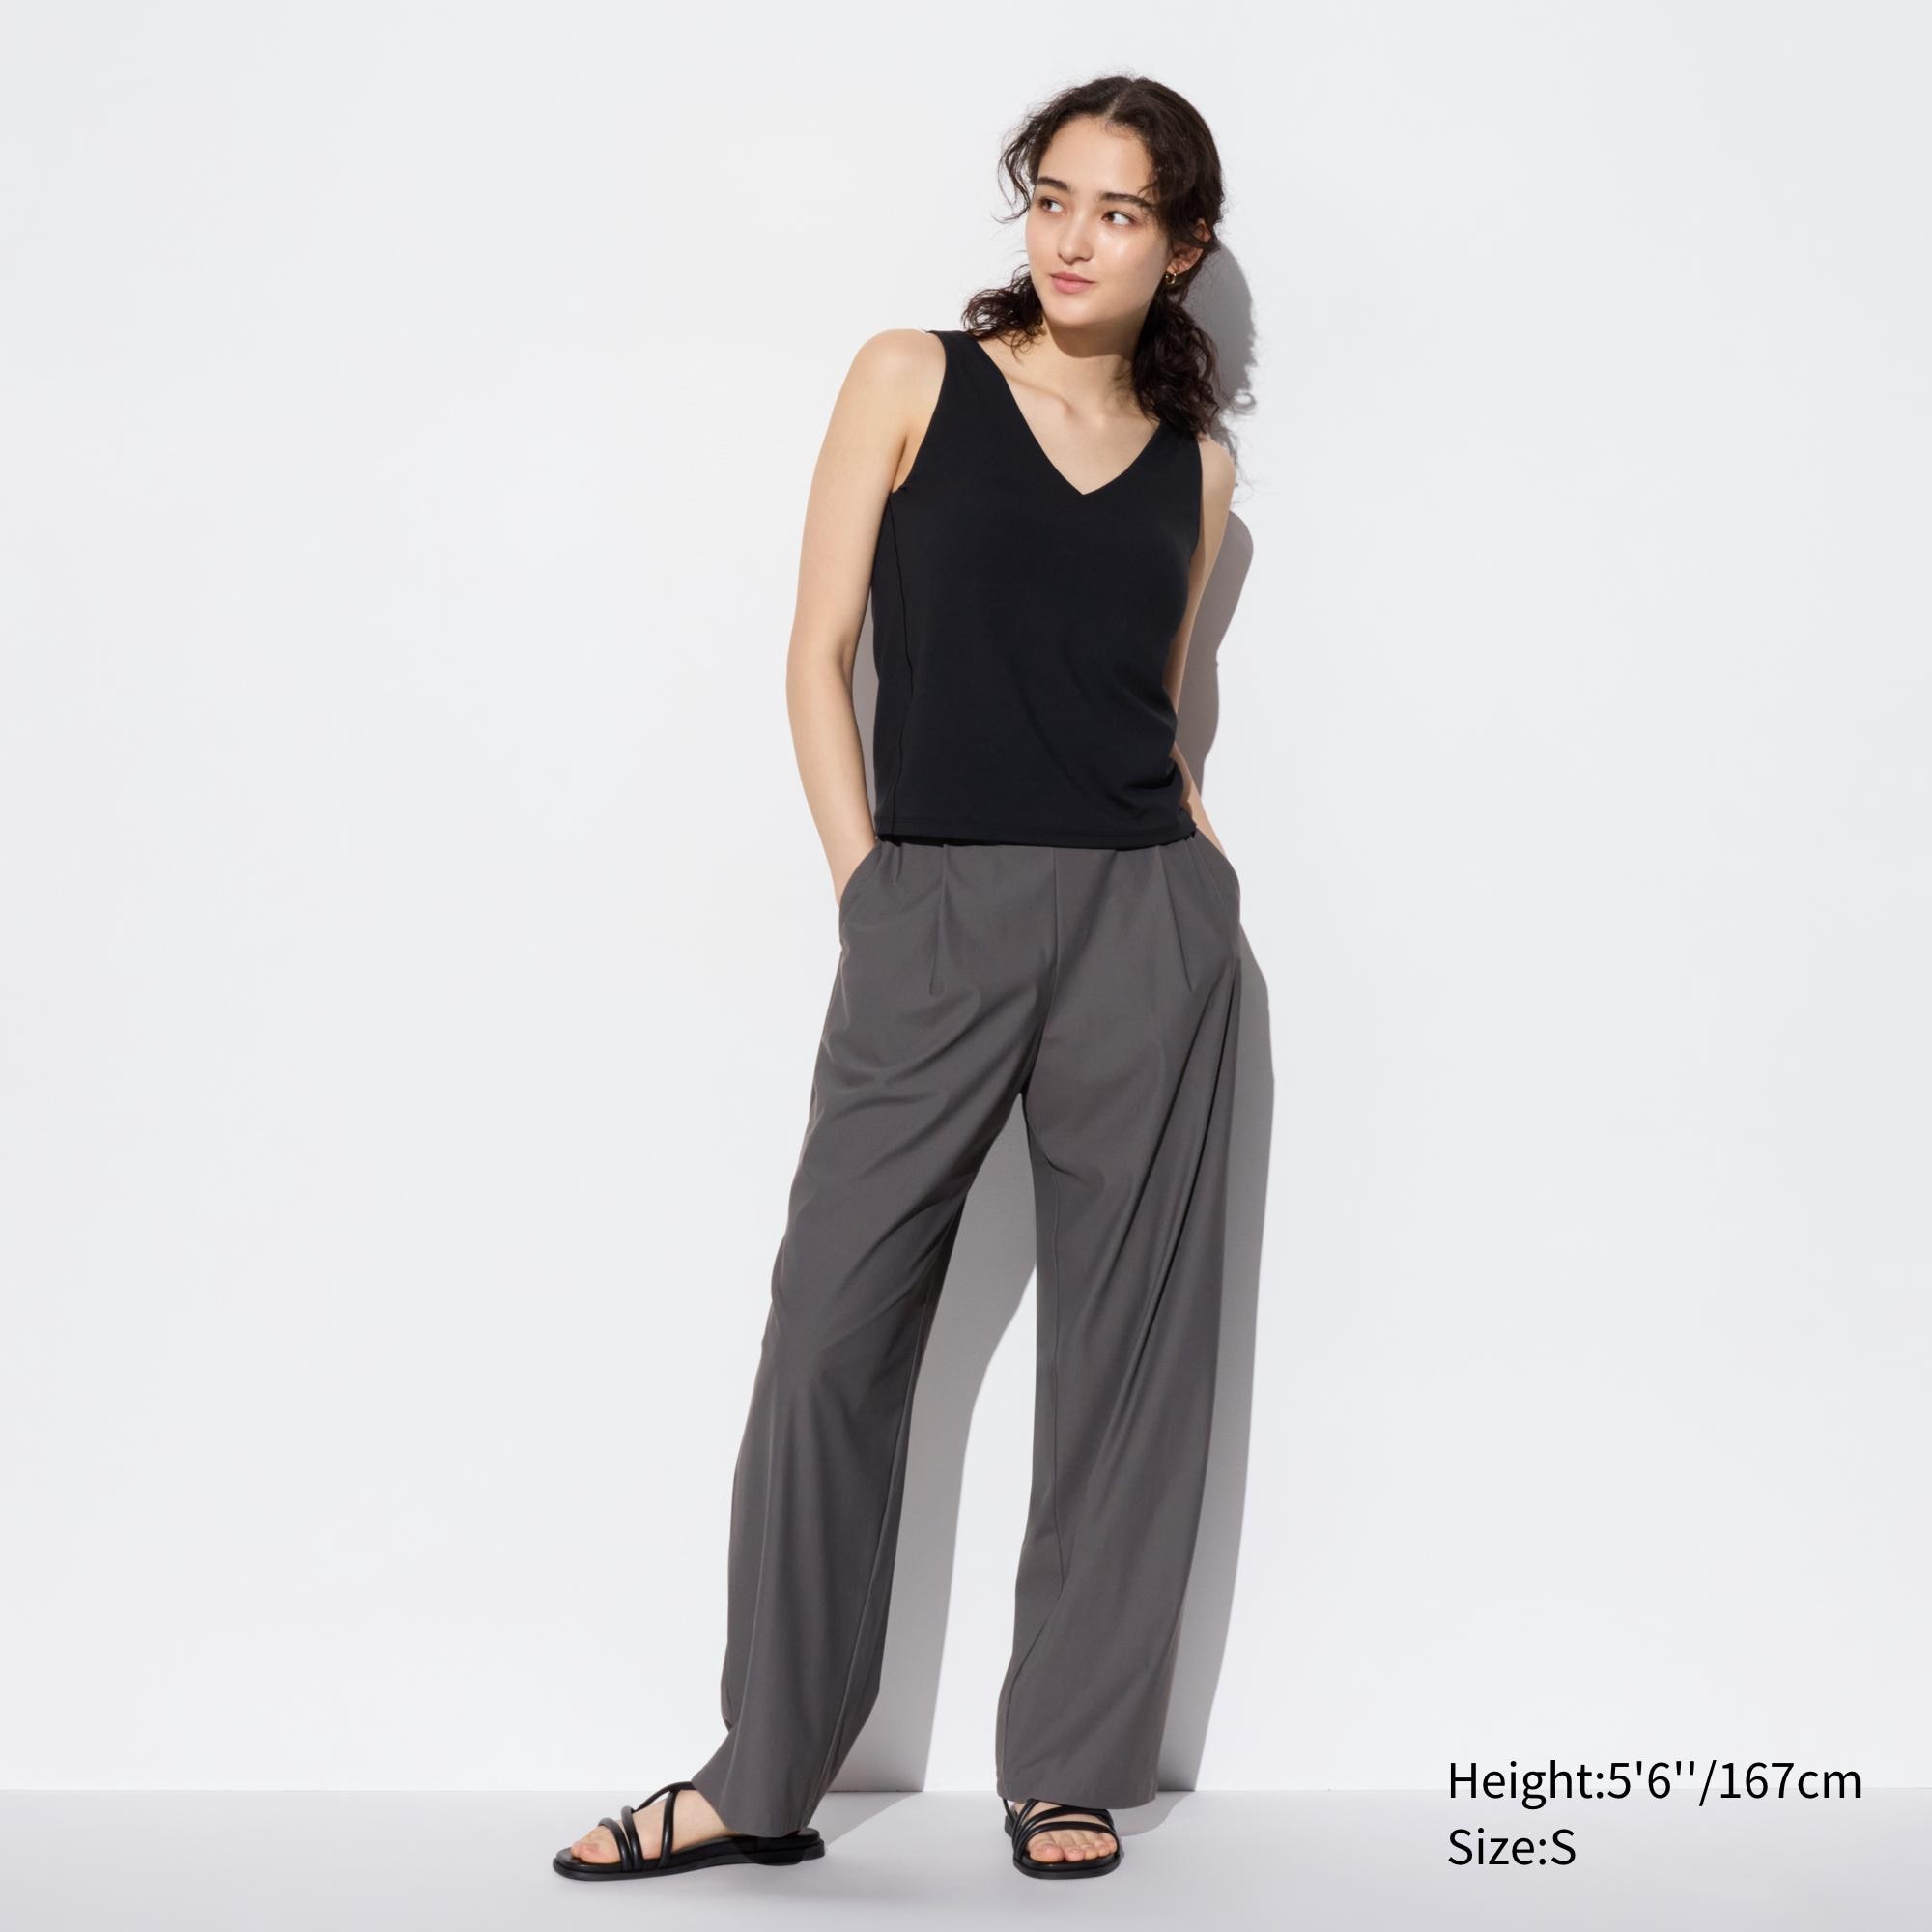 AIRISM Bra Tops - All-Day-Long Comfort @ Uniqlo $14.9 - Extrabux